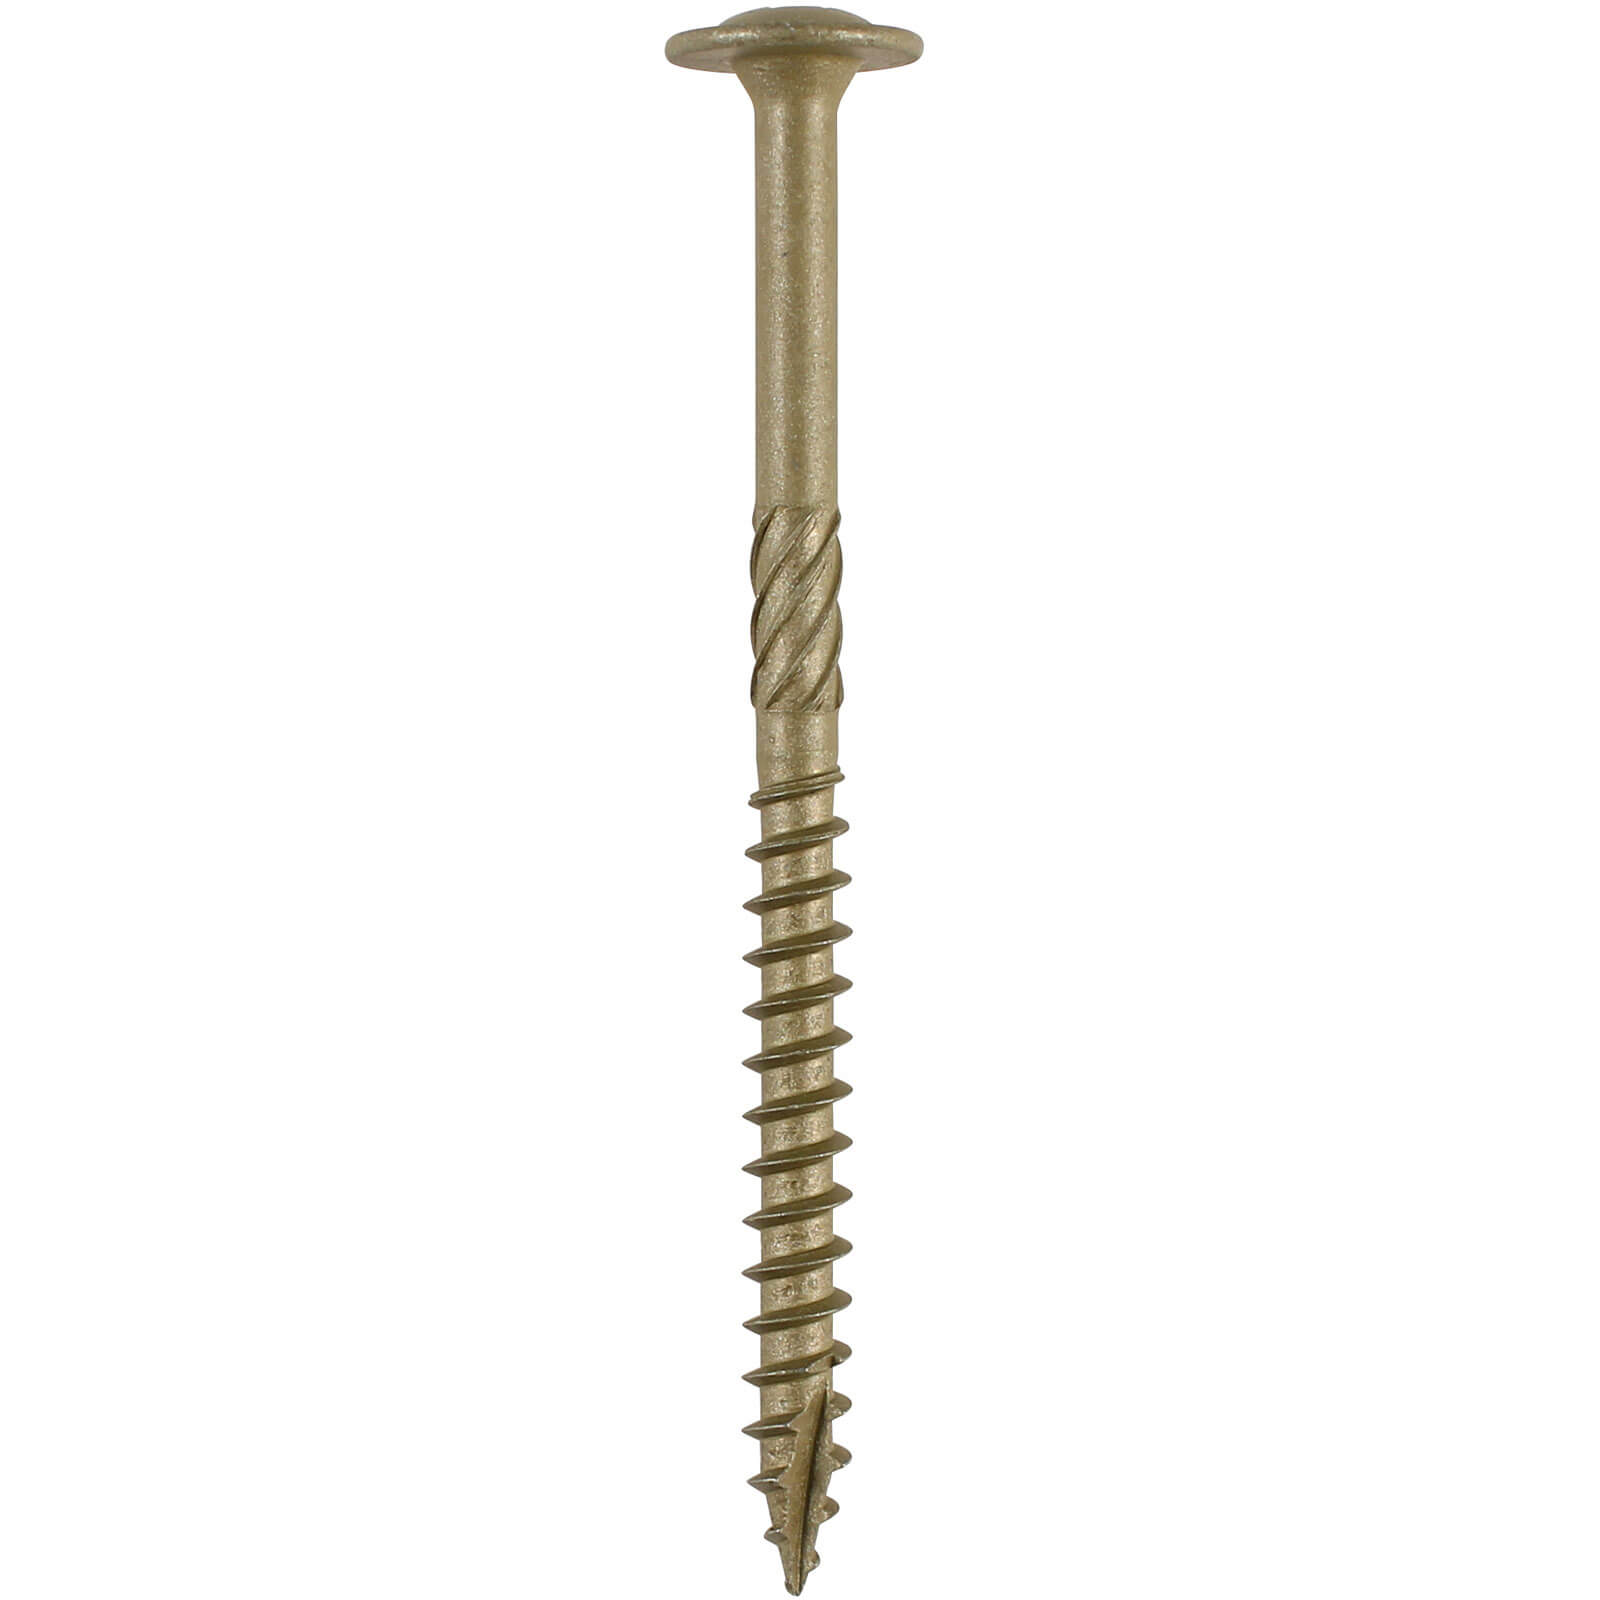 Photos - Nail / Screw / Fastener TIMCO Wafer Torx Head Index Wood Screws 8mm 350mm Pack of 25 350INW 